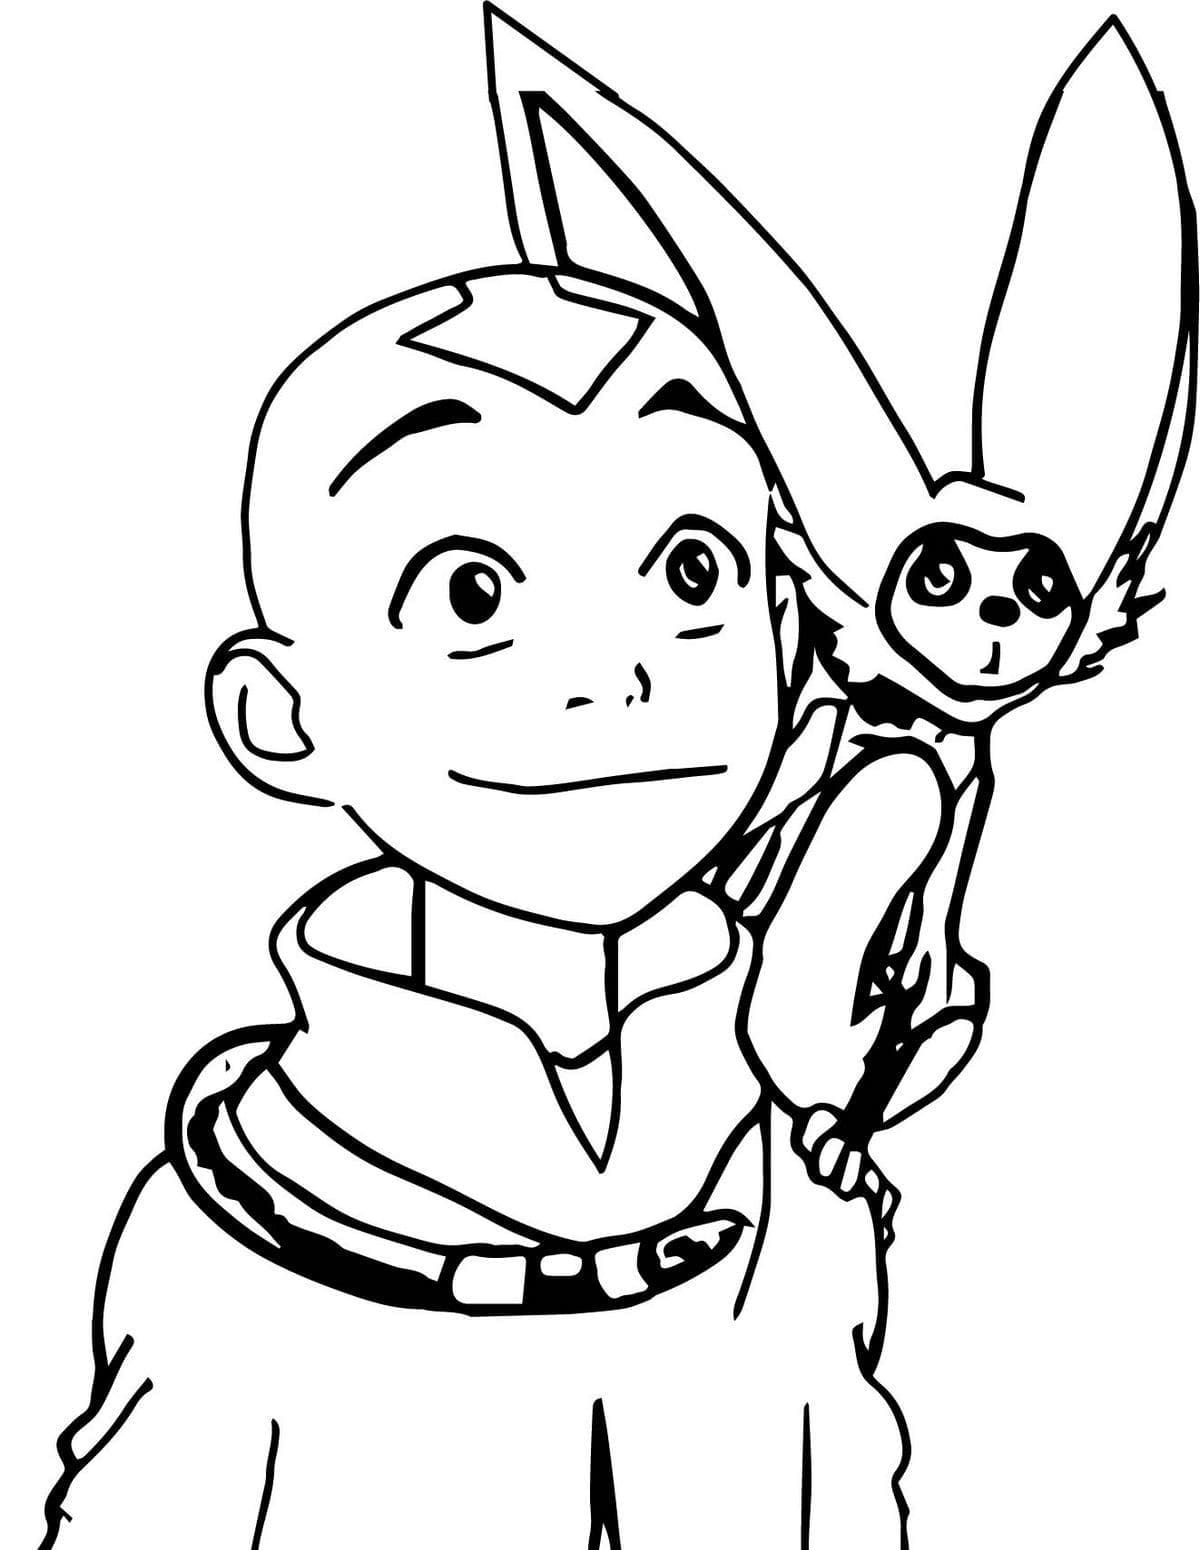 Aang et Momo coloring page